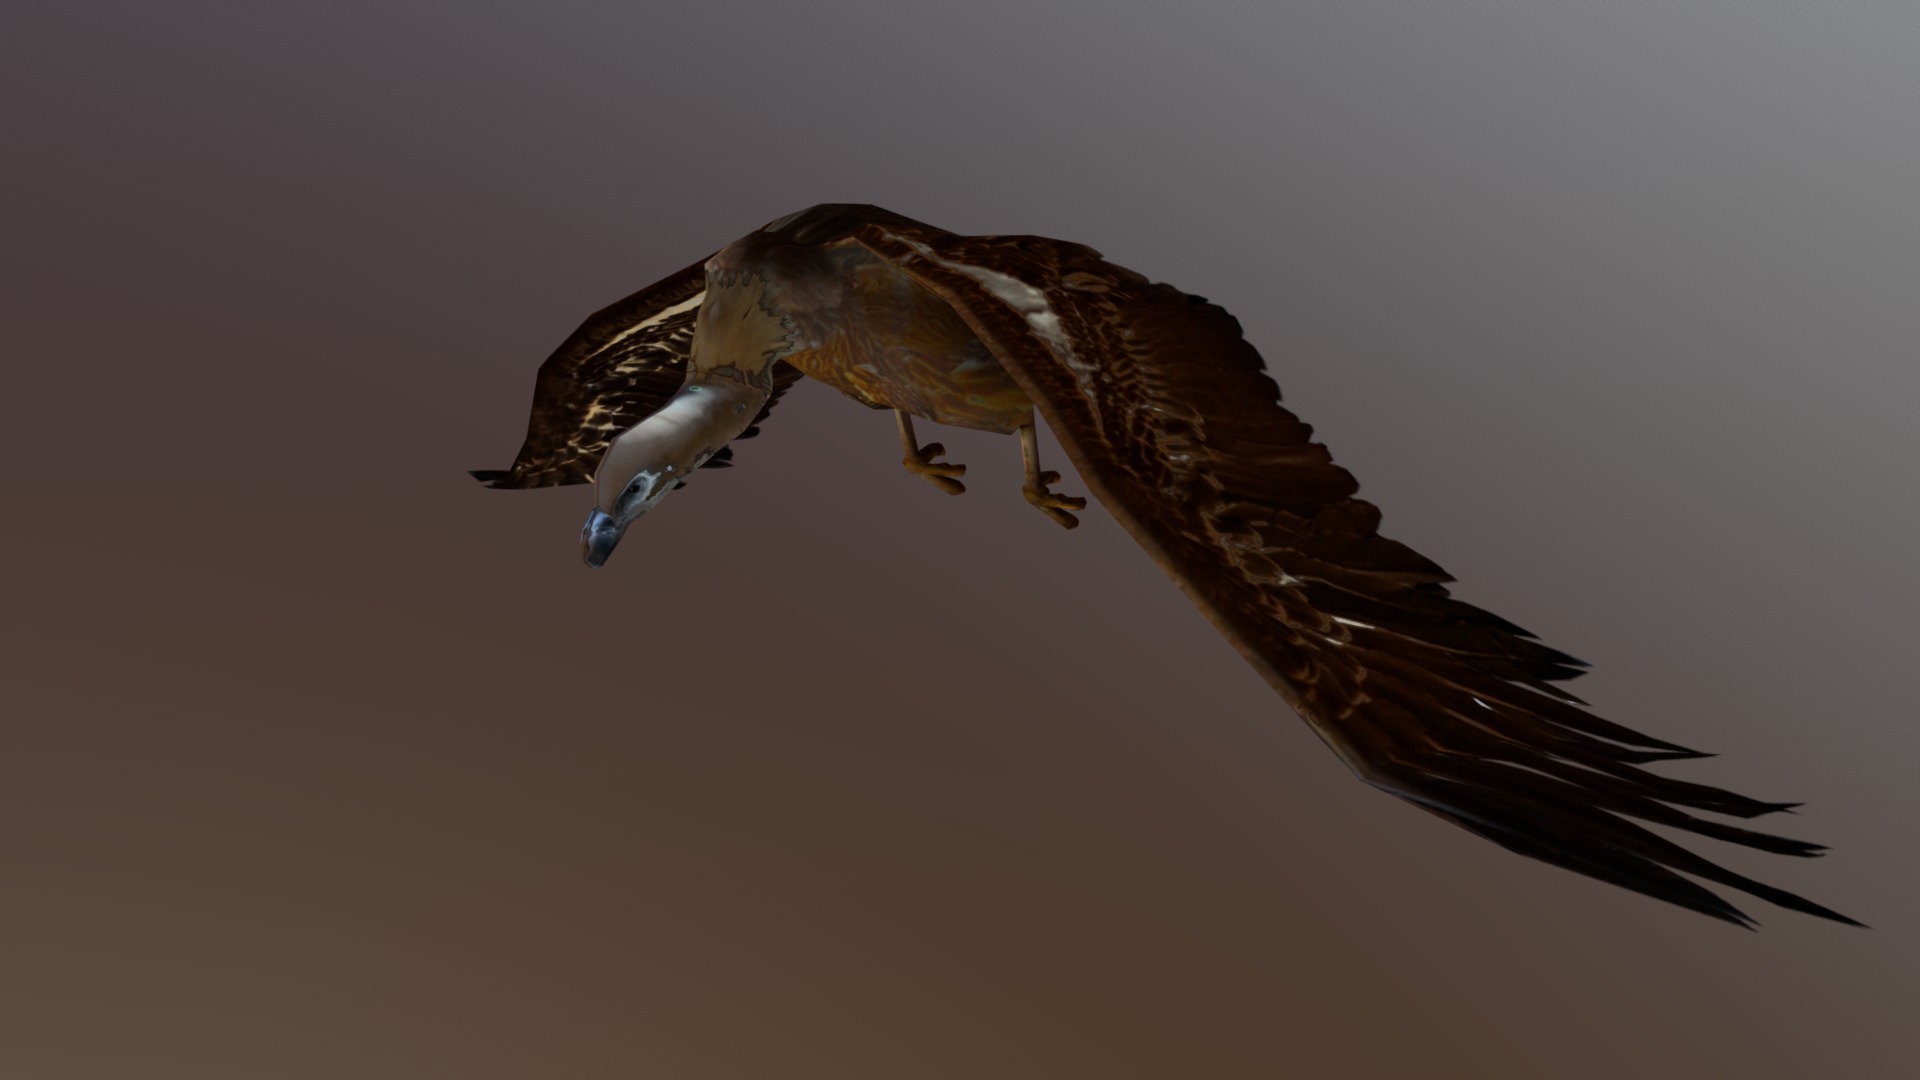 3D model African animals – Sip - This is a 3D model of the African animals - Sip. The 3D model is about a bird flying in the sky.